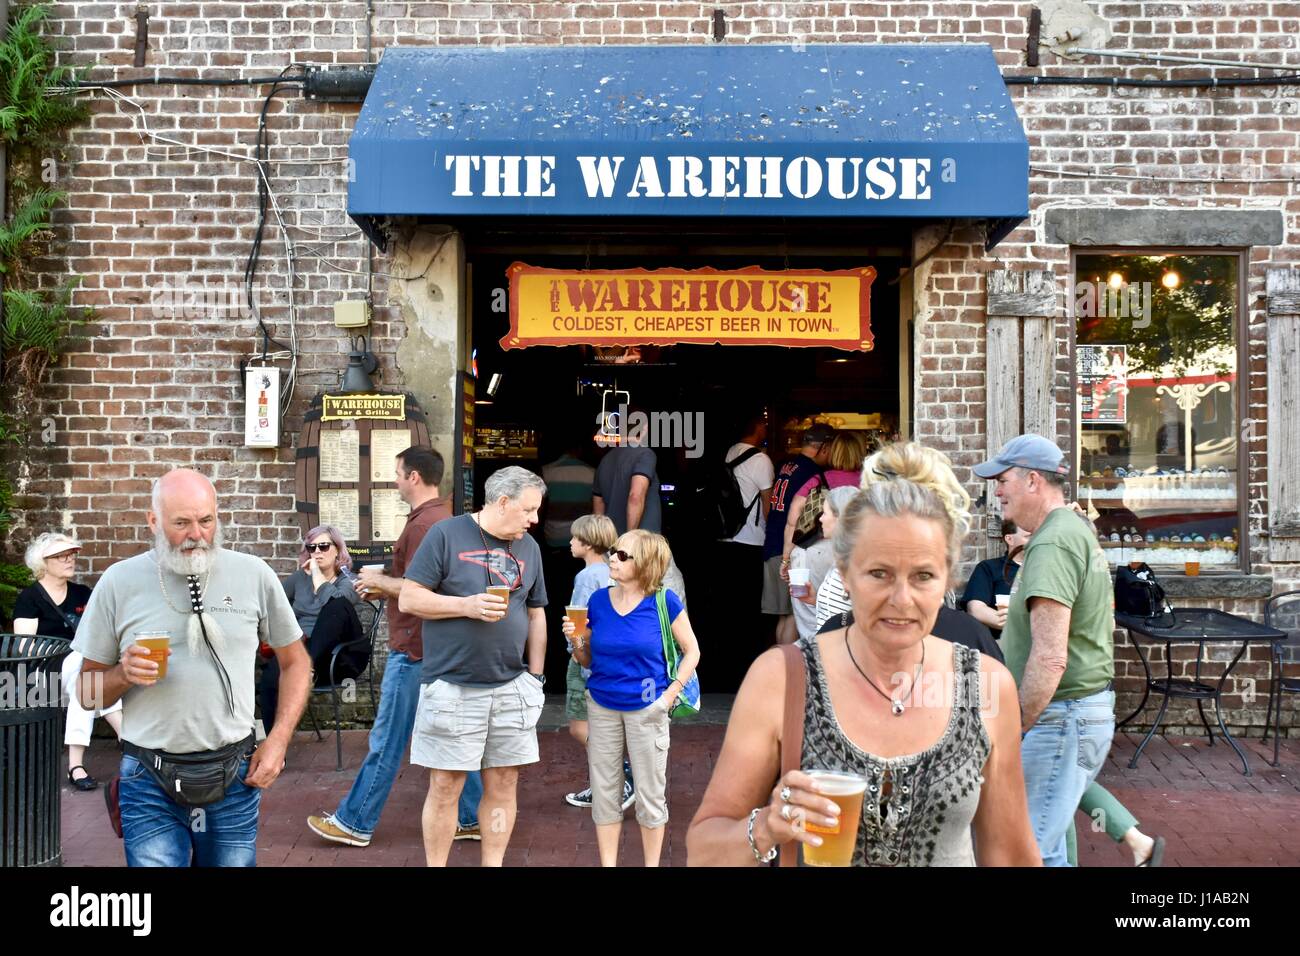 The Warehouse coldest cheapest beer in town Stock Photo